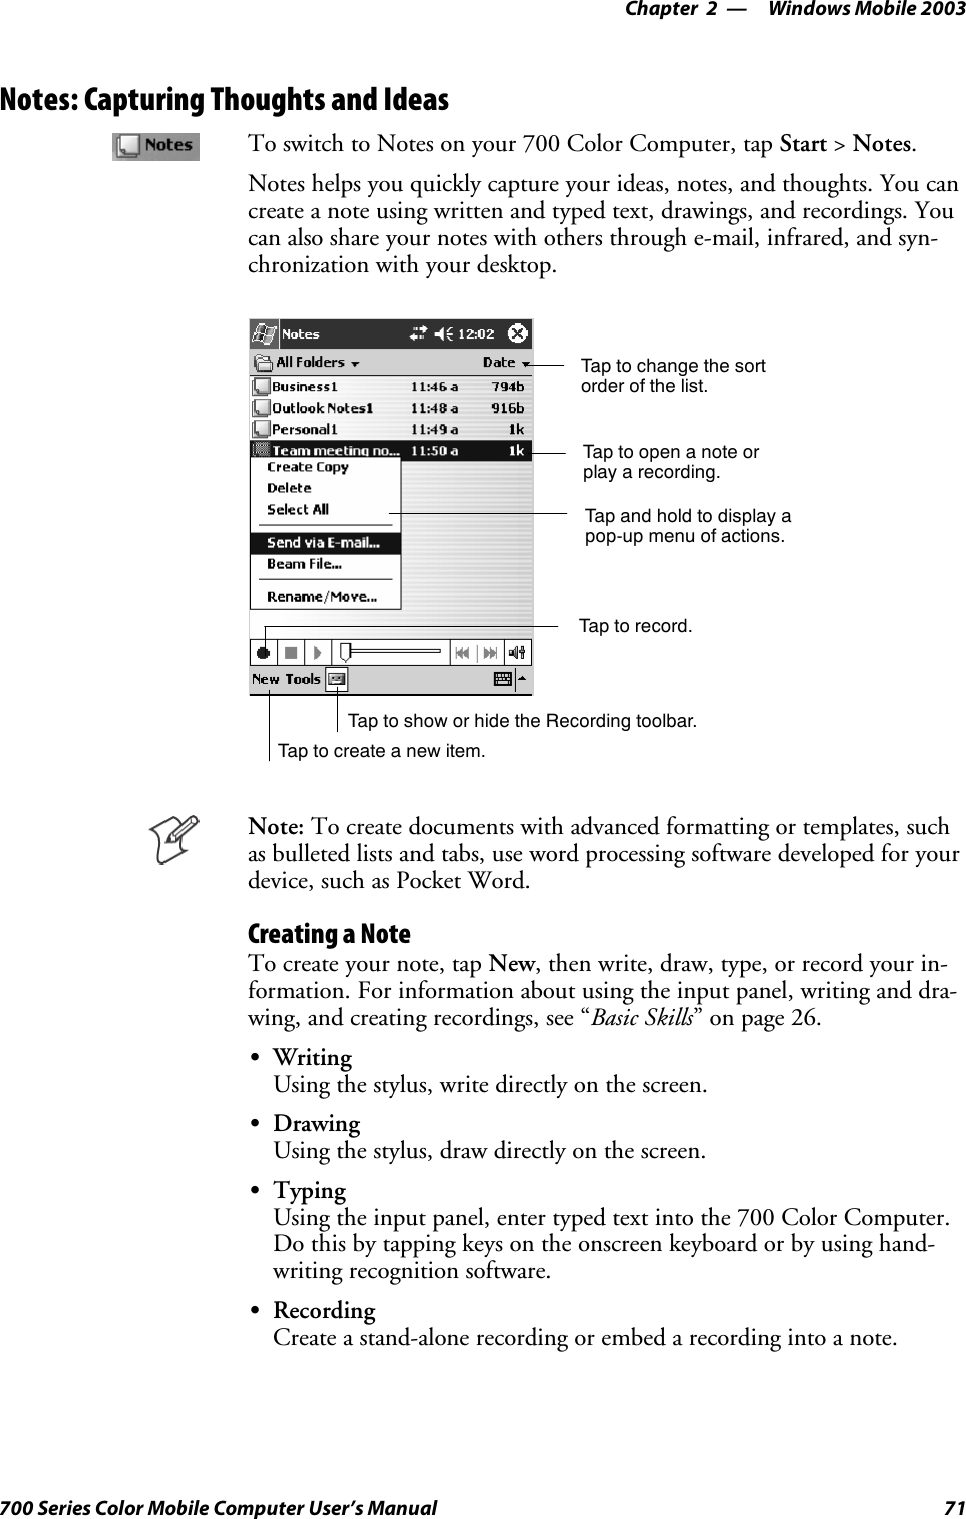 Windows Mobile 2003—Chapter 271700 Series Color Mobile Computer User’s ManualNotes: Capturing Thoughts and IdeasTo switch to Notes on your 700 Color Computer, tap Start &gt;Notes.Notes helps you quickly capture your ideas, notes, and thoughts. You cancreate a note using written and typed text, drawings, and recordings. Youcan also share your notes with others through e-mail, infrared, and syn-chronization with your desktop.Tap to change the sortorder of the list.Tap to create a new item.Taptoopenanoteorplay a recording.Tap and hold to display apop-up menu of actions.Tap to record.Tap to show or hide the Recording toolbar.Note: To create documents with advanced formatting or templates, suchas bulleted lists and tabs, use word processing software developed for yourdevice, such as Pocket Word.Creating a NoteTo create your note, tap New, then write, draw, type, or record your in-formation. For information about using the input panel, writing and dra-wing, and creating recordings, see “Basic Skills” on page 26.SWritingUsing the stylus, write directly on the screen.SDrawingUsing the stylus, draw directly on the screen.STypingUsing the input panel, enter typed text into the 700 Color Computer.Do this by tapping keys on the onscreen keyboard or by using hand-writing recognition software.SRecordingCreate a stand-alone recording or embed a recording into a note.